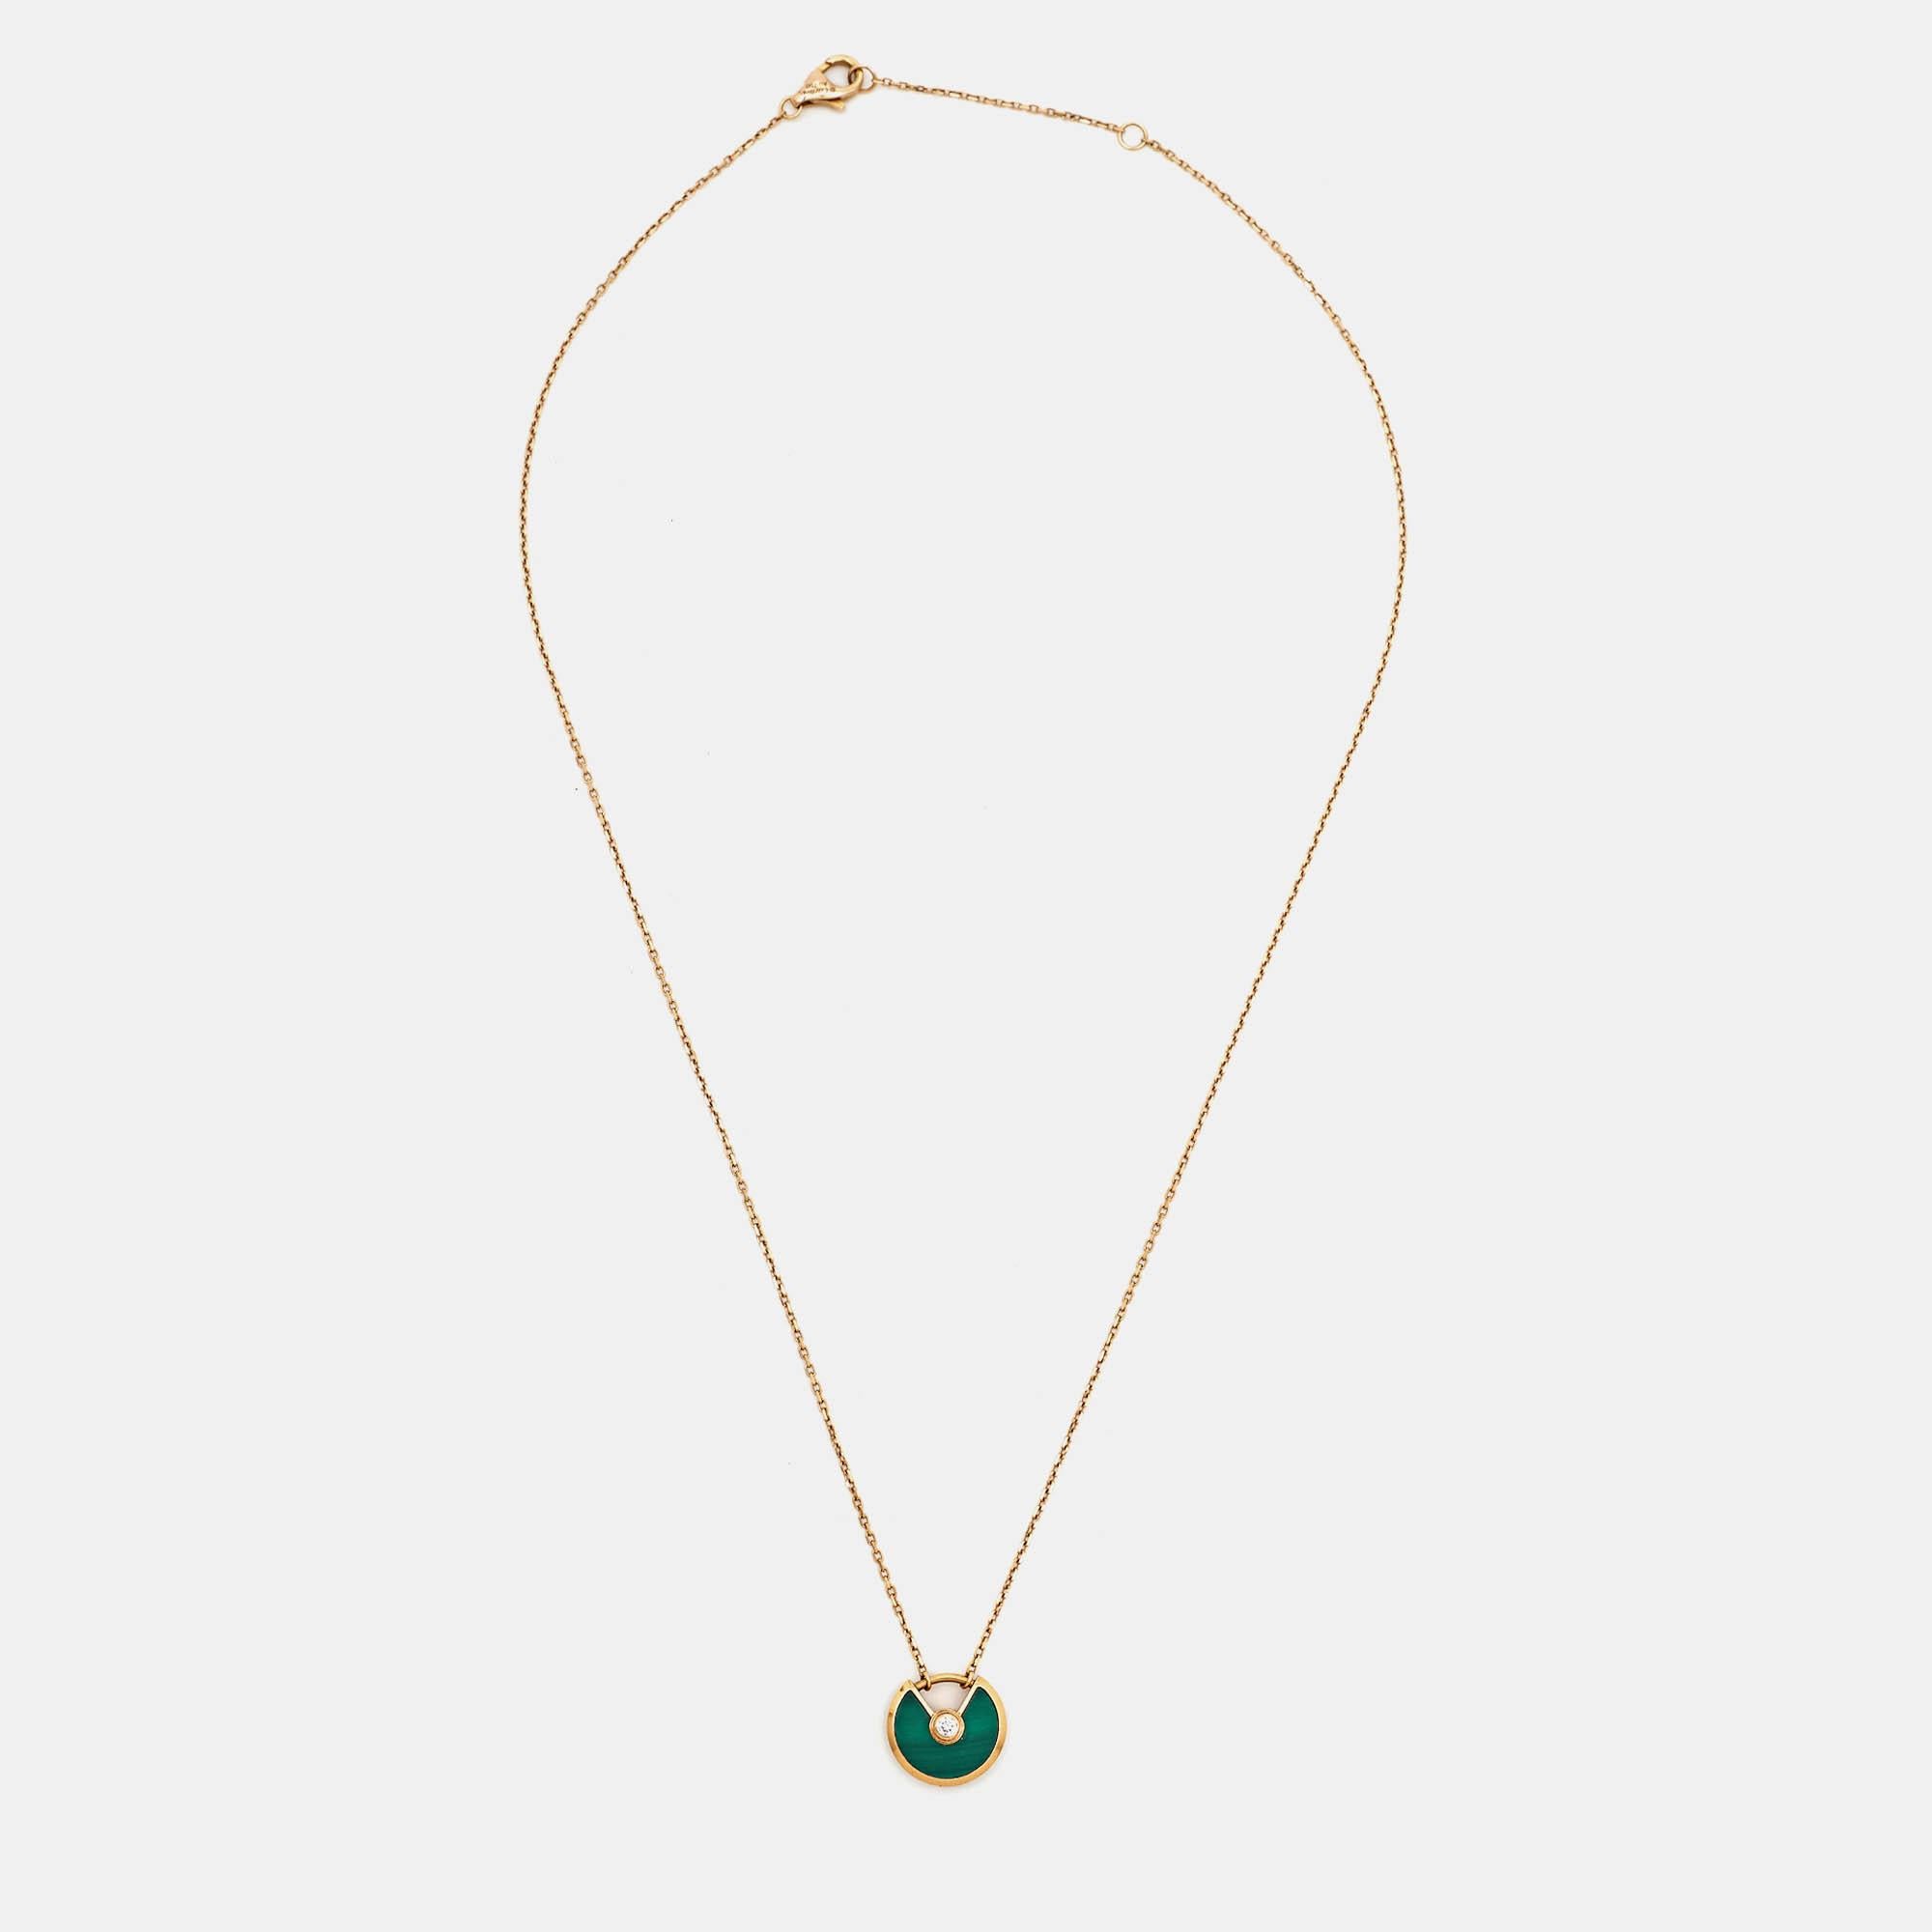 This Amulette de Cartier necklace is subtly elegant as well as beautifully luxurious. Constructed in 18K rose gold, this necklace features a disc charm inlaid with malachite and punctuated with a single diamond.

Includes: Original Case